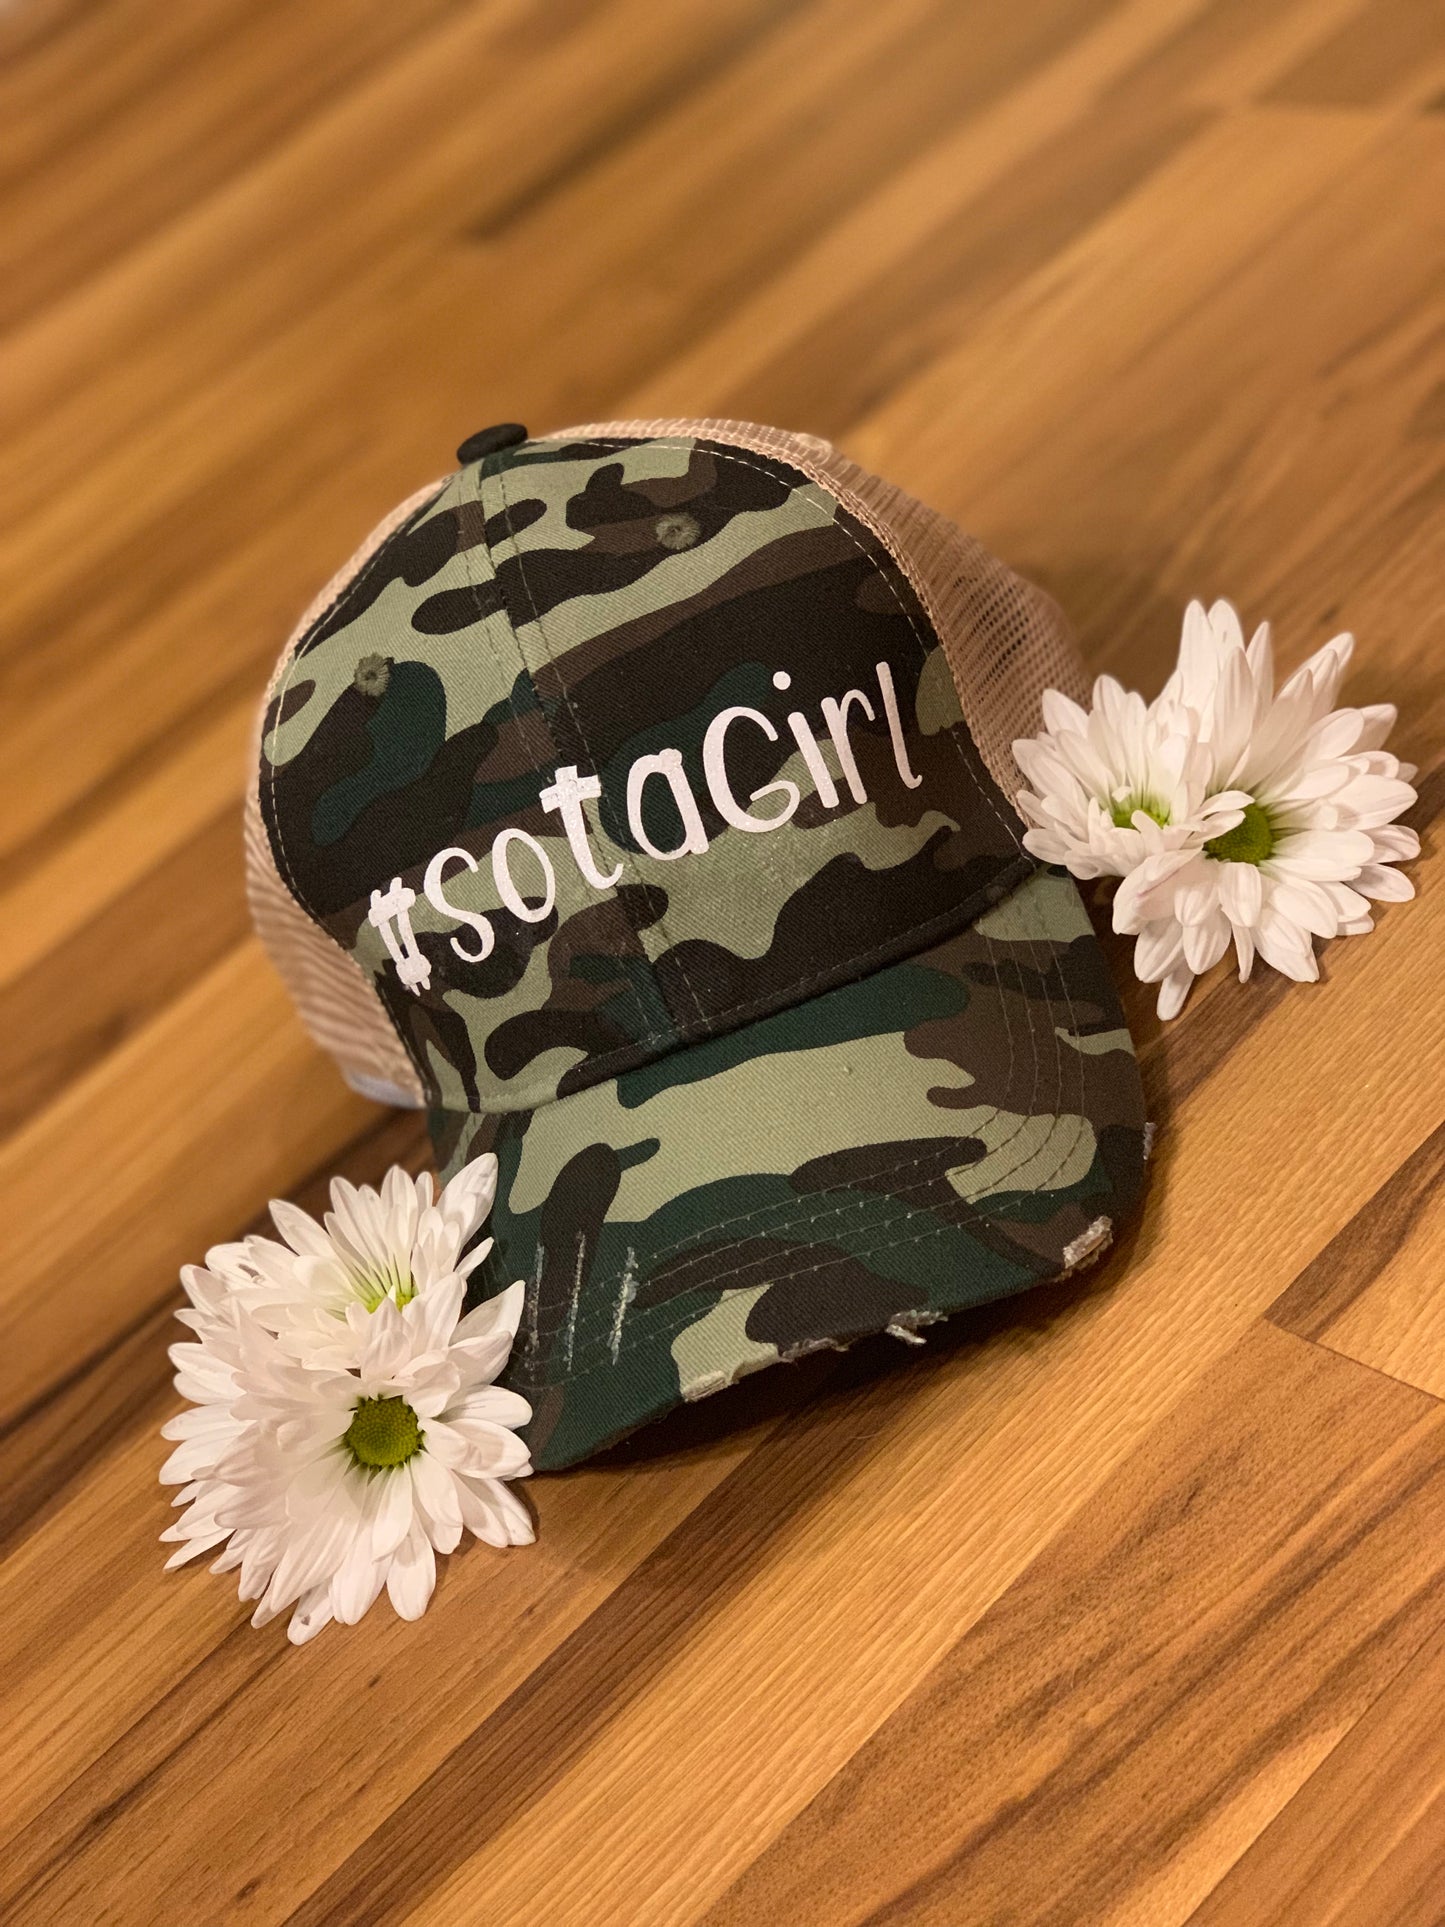 Hat { Minnesota } Pink and white camouflage • State of Mn • Womens trucker cap • Adjustable snapback • Mesh breathable back • Sota • $10 hat! • Only 6 left!! - Stacy's Pink Martini Boutique